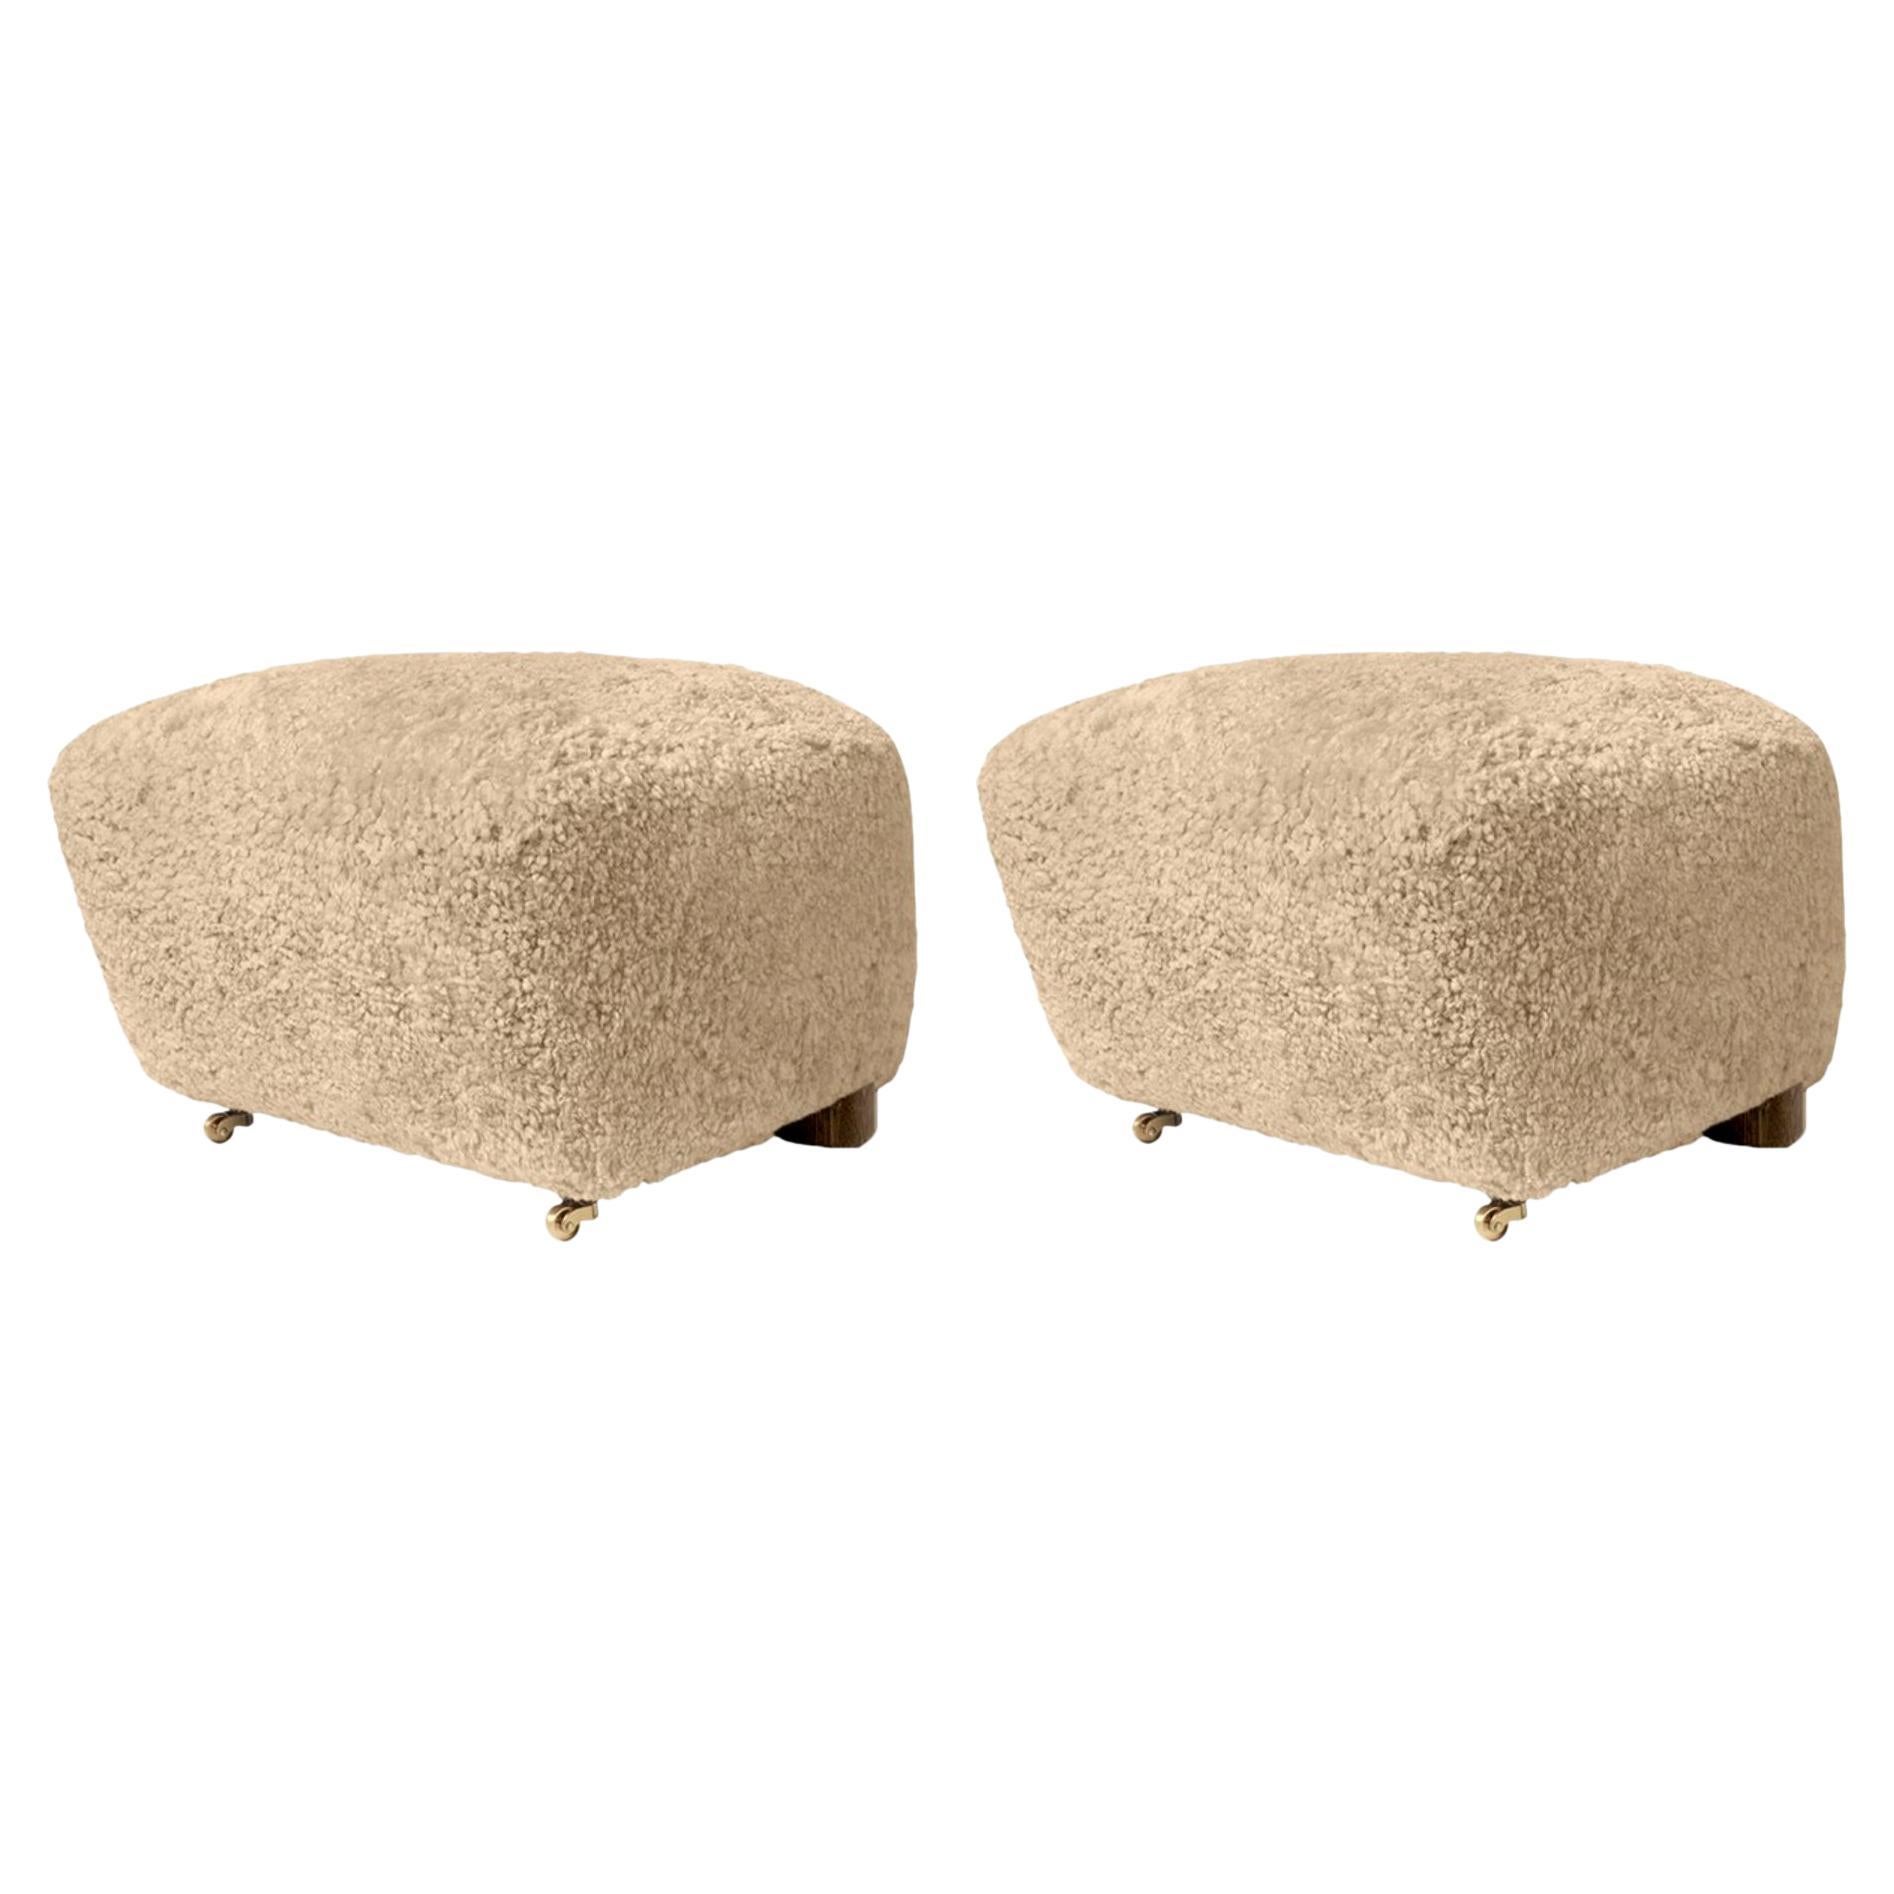 Set of 2 Honey Smoked Oak Sheepskin the Tired Man Footstools by Lassen For Sale